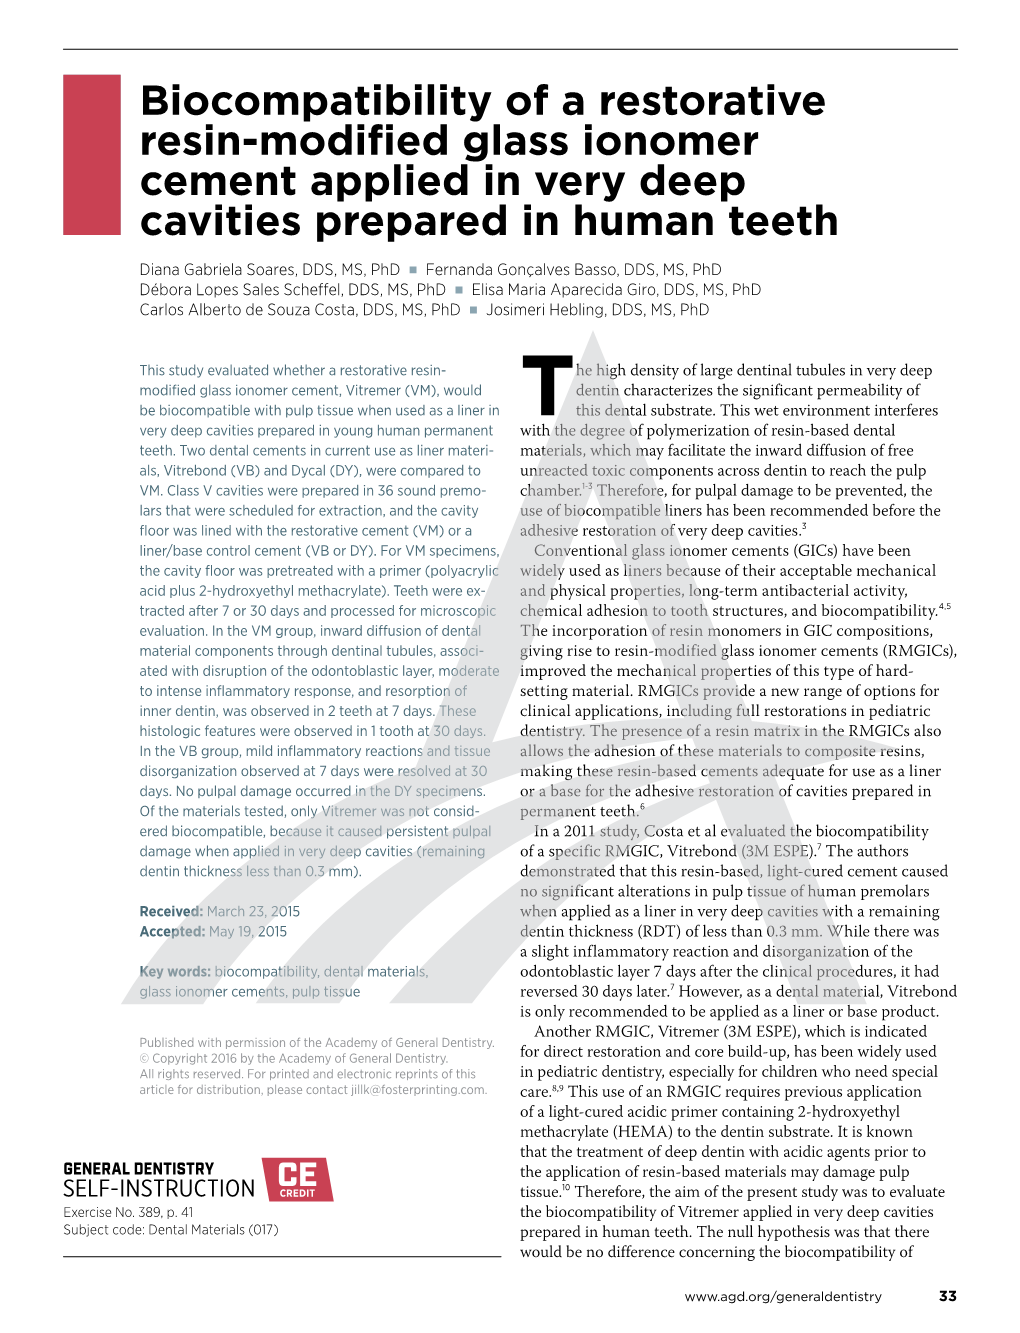 Biocompatibility of a Restorative Resin-Modified Glass Ionomer Cement Applied in Very Deep Cavities Prepared in Human Teeth